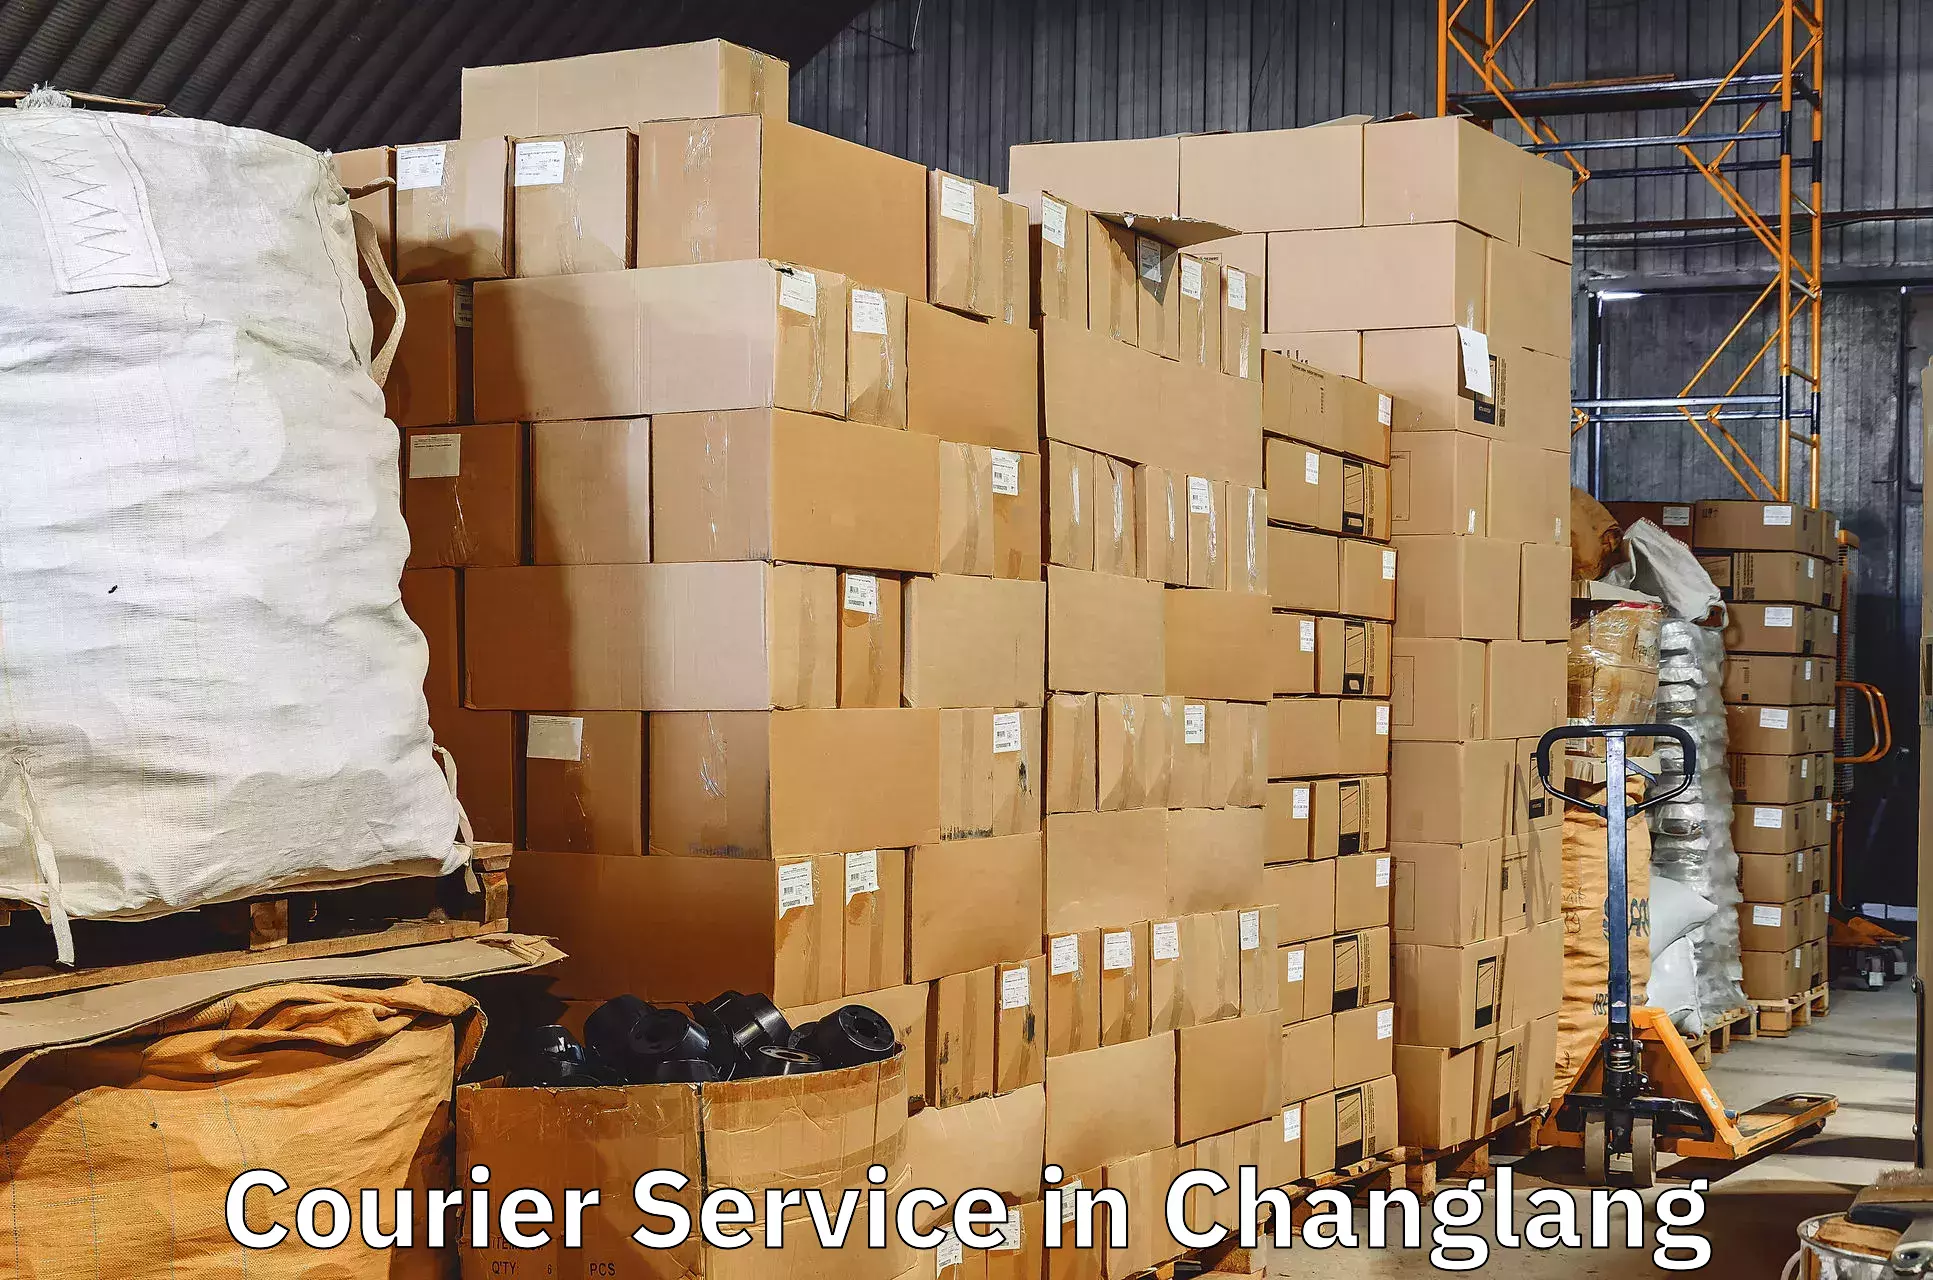 Efficient parcel tracking in Changlang